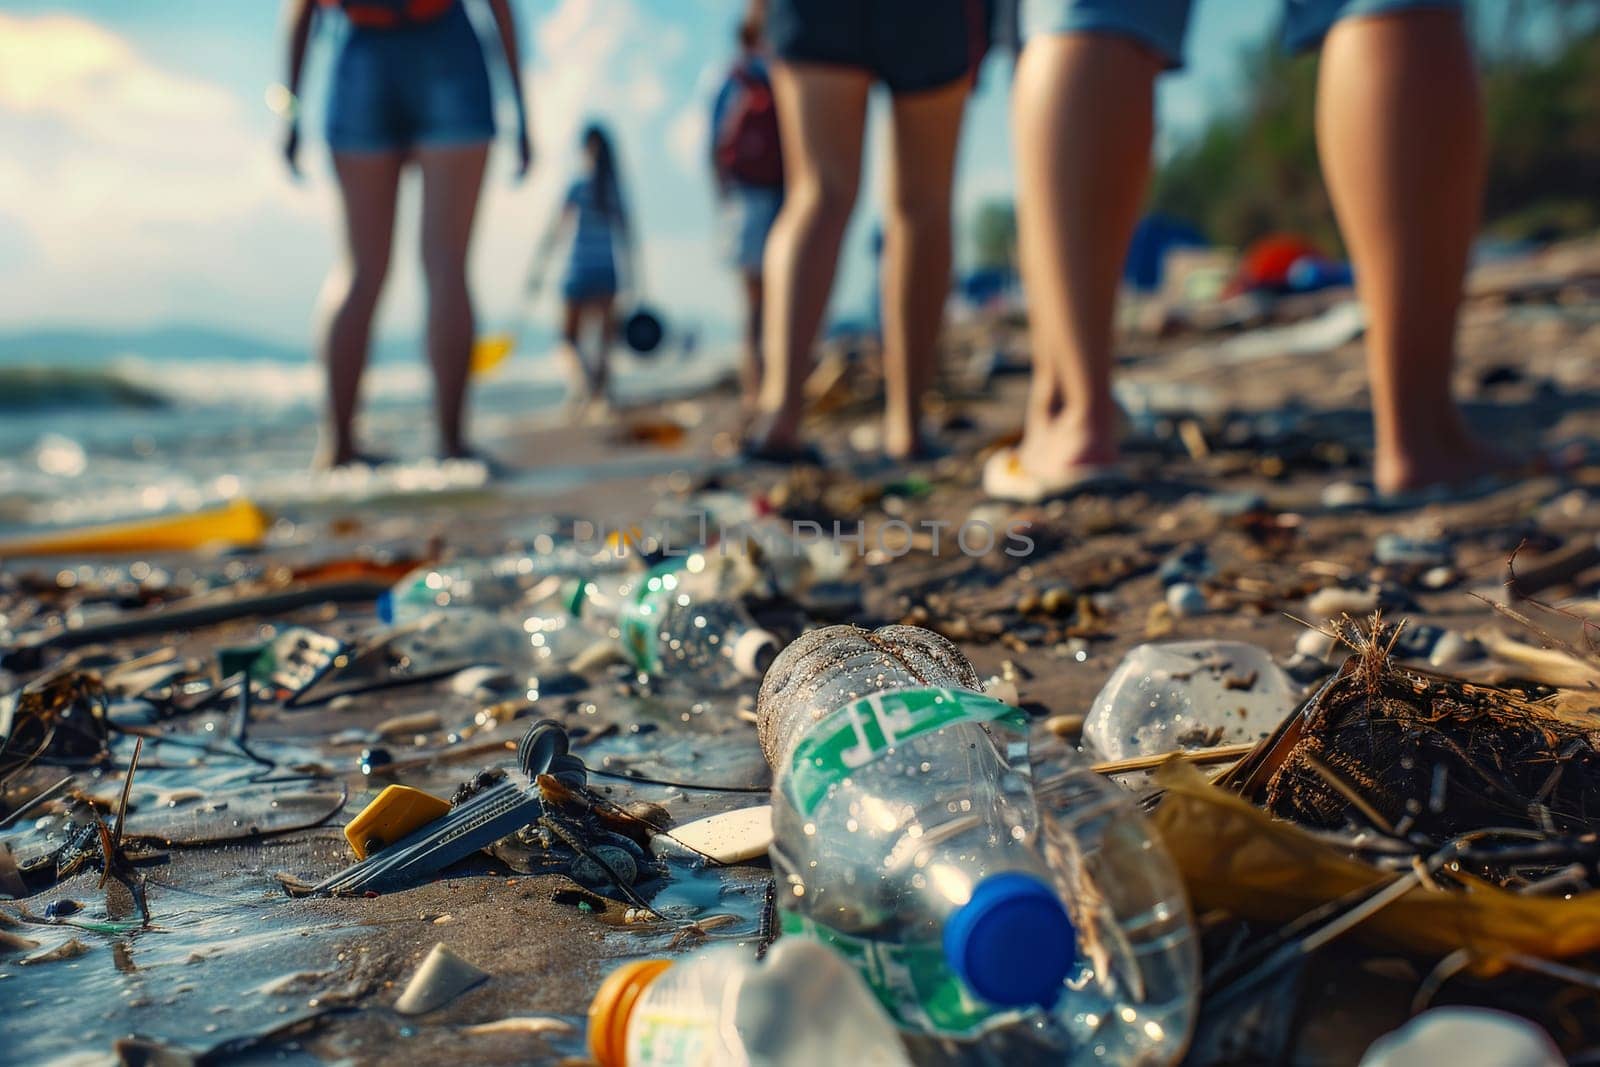 A beach is littered with trash, including a bottle with a blue cap. The scene is a reminder of the importance of proper waste disposal and the impact of pollution on the environment